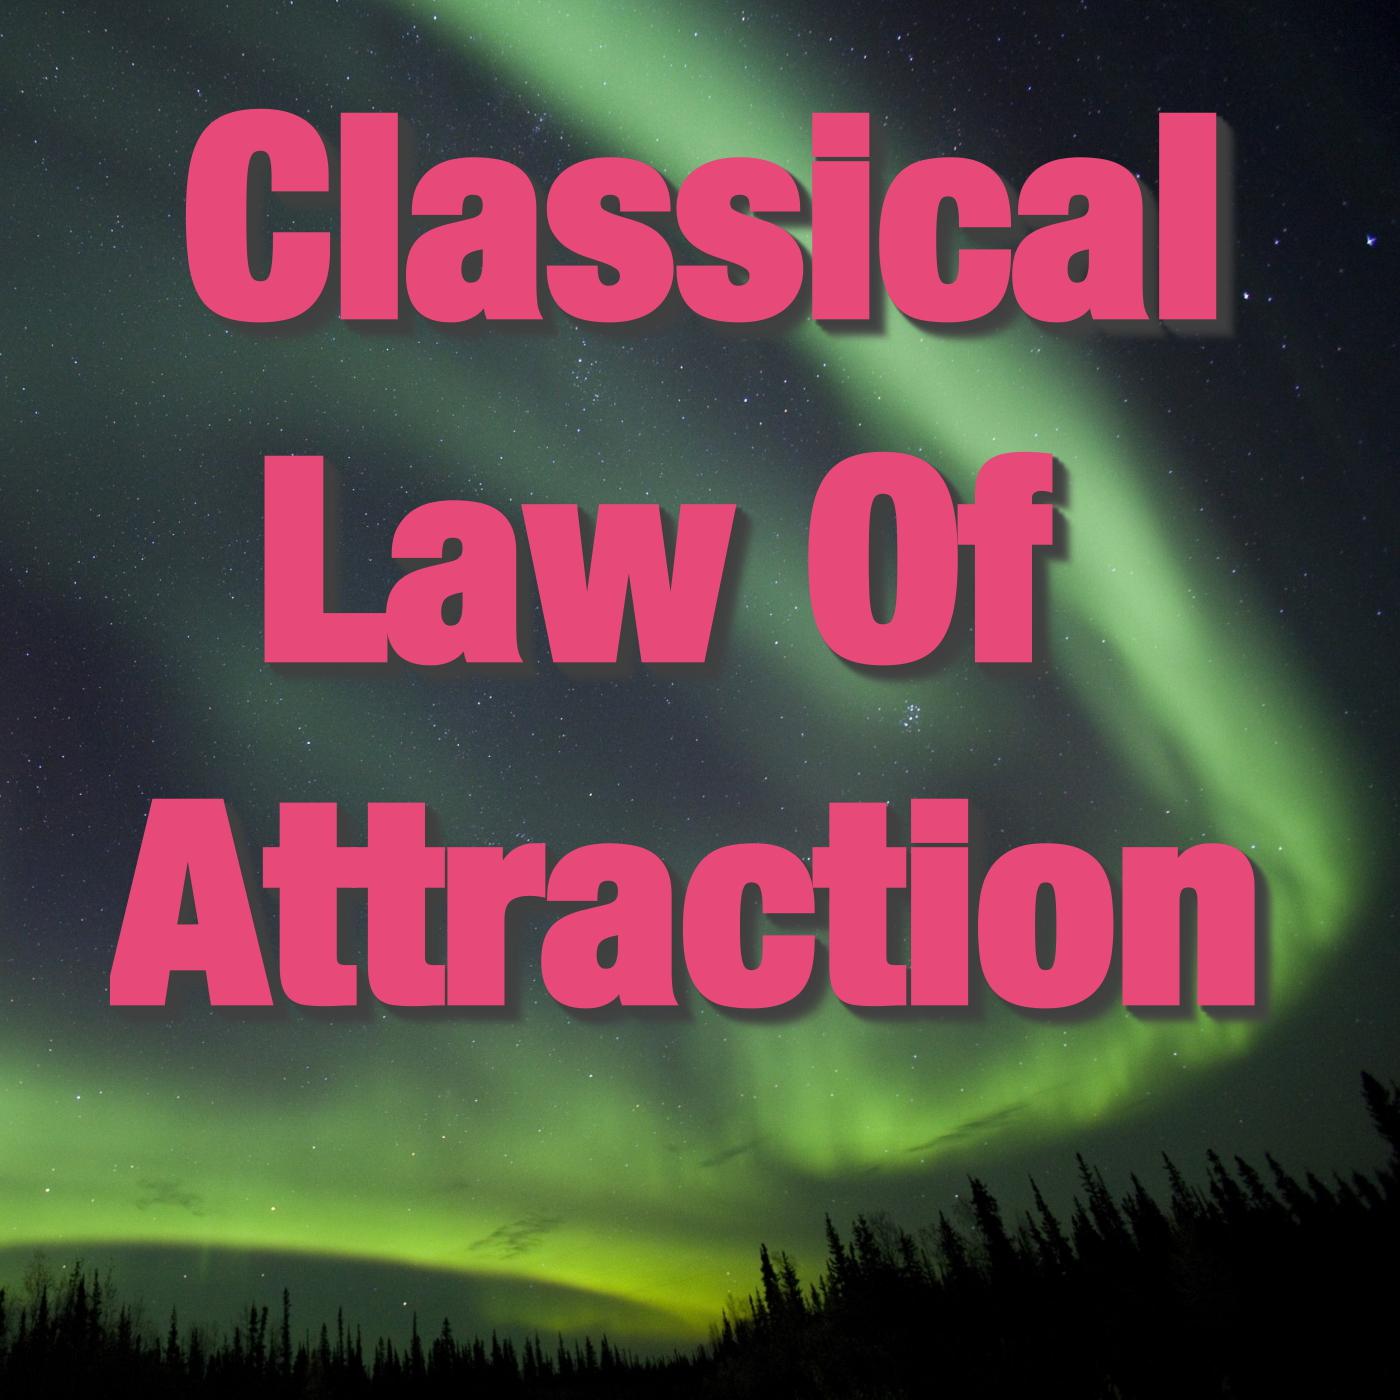 Classical Law Of Attraction